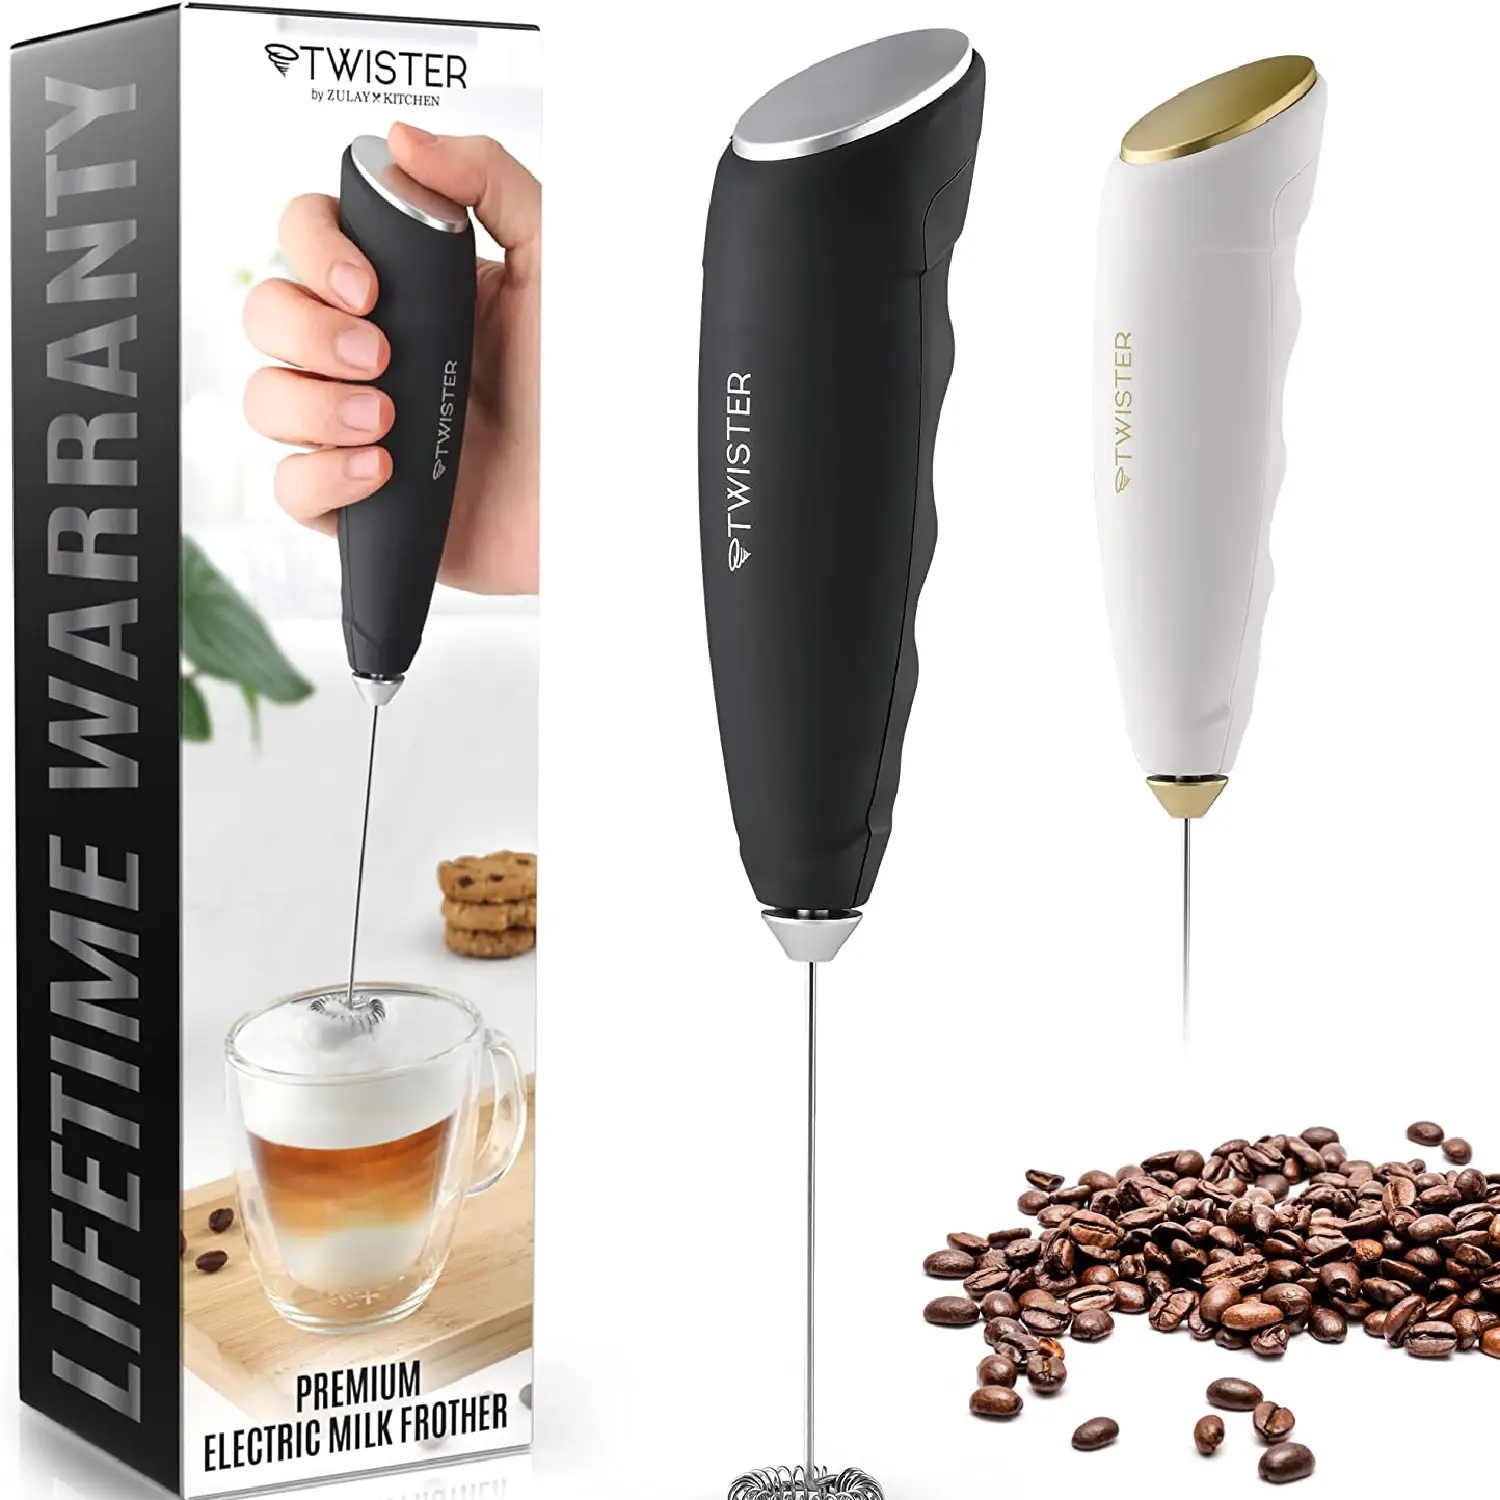 Powerful Twister Milk Frother Handheld Foam Maker for Lattes 